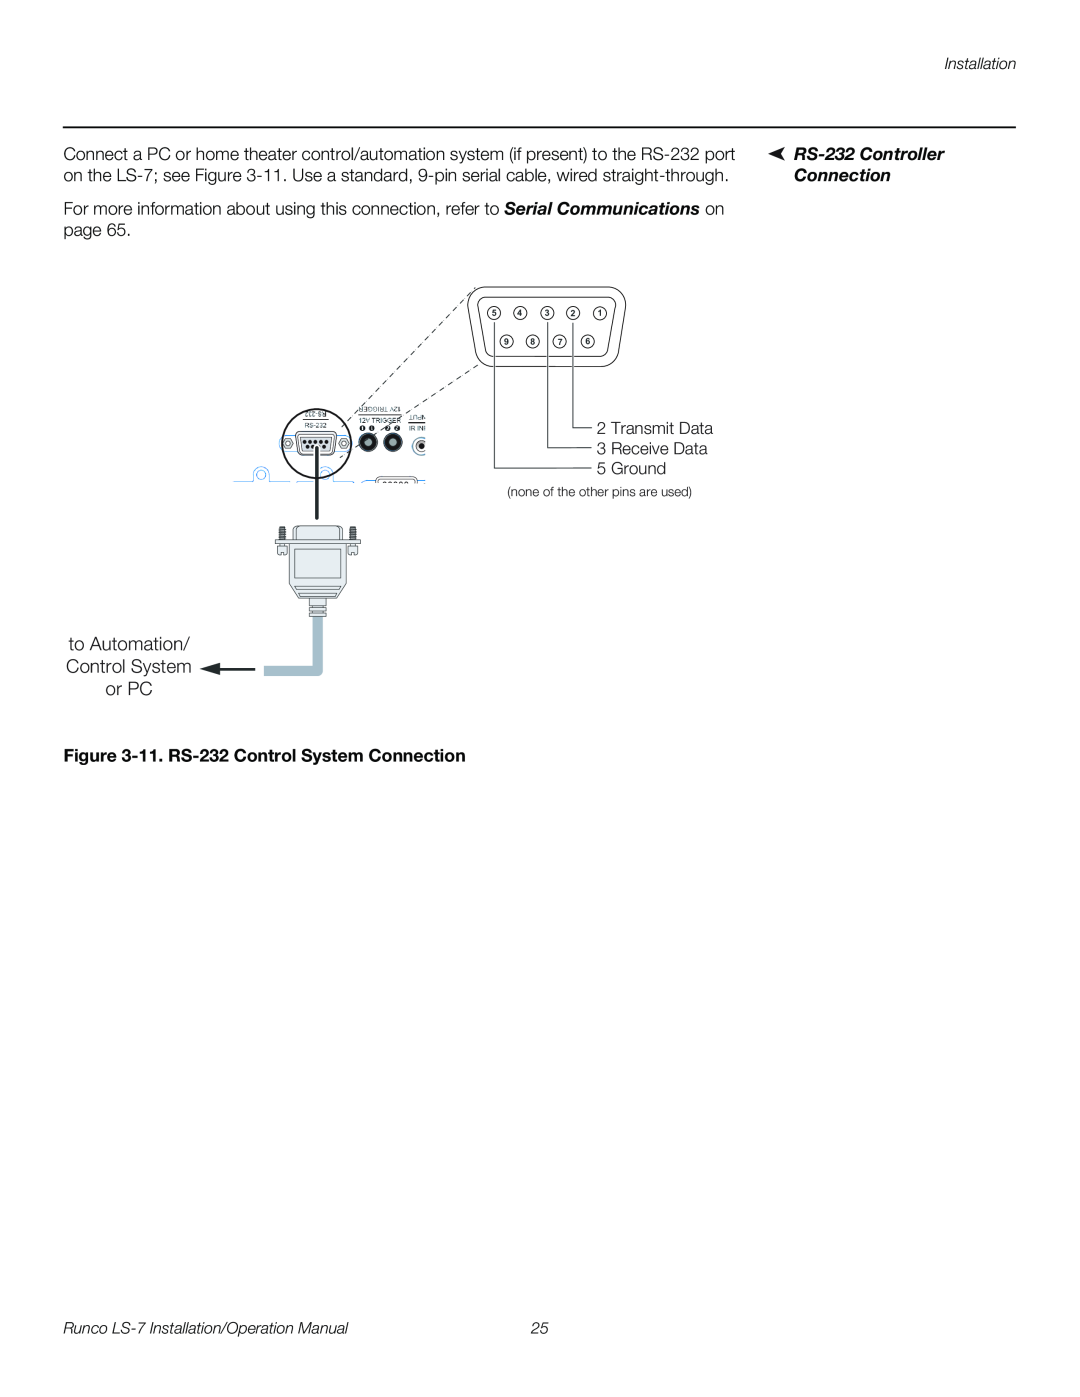 Runco LS-7 operation manual to Automation/ Control System or PC, RS-232Controller, 11. RS-232Control System Connection 